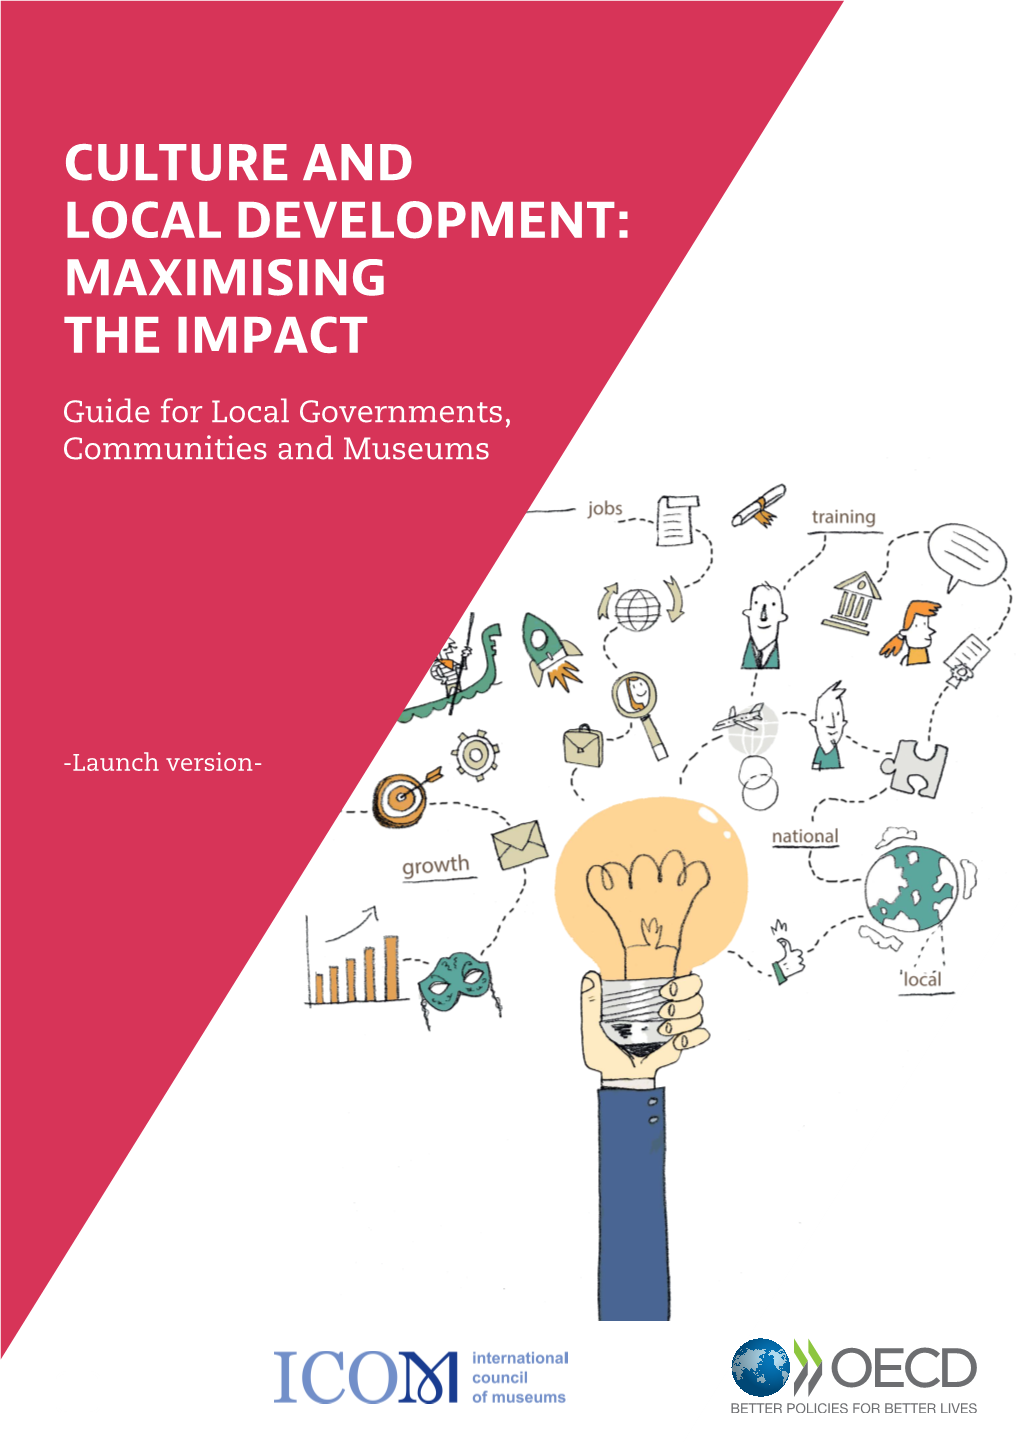 OECD Guide: Culture and Local Development: Maximising the Impact